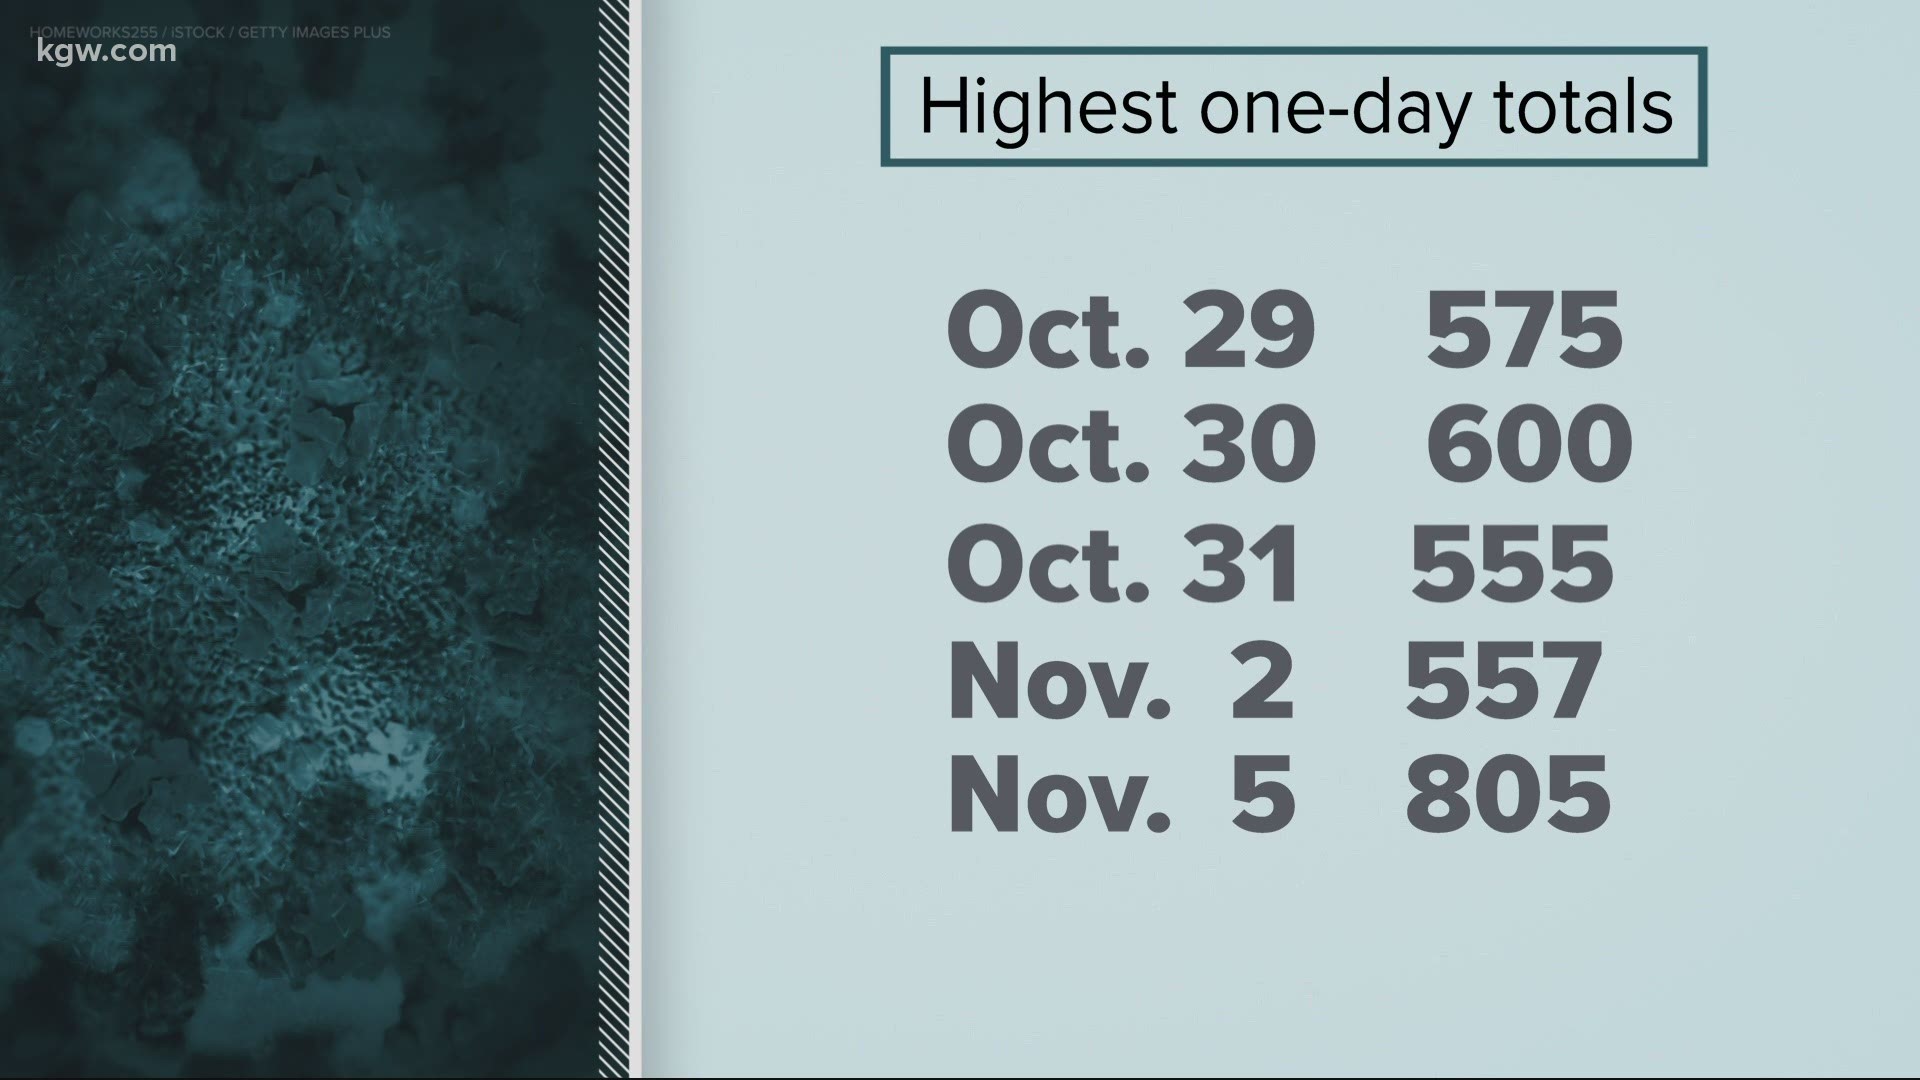 On Thursday, Oregon shattered its single-day record with 805 new cases.